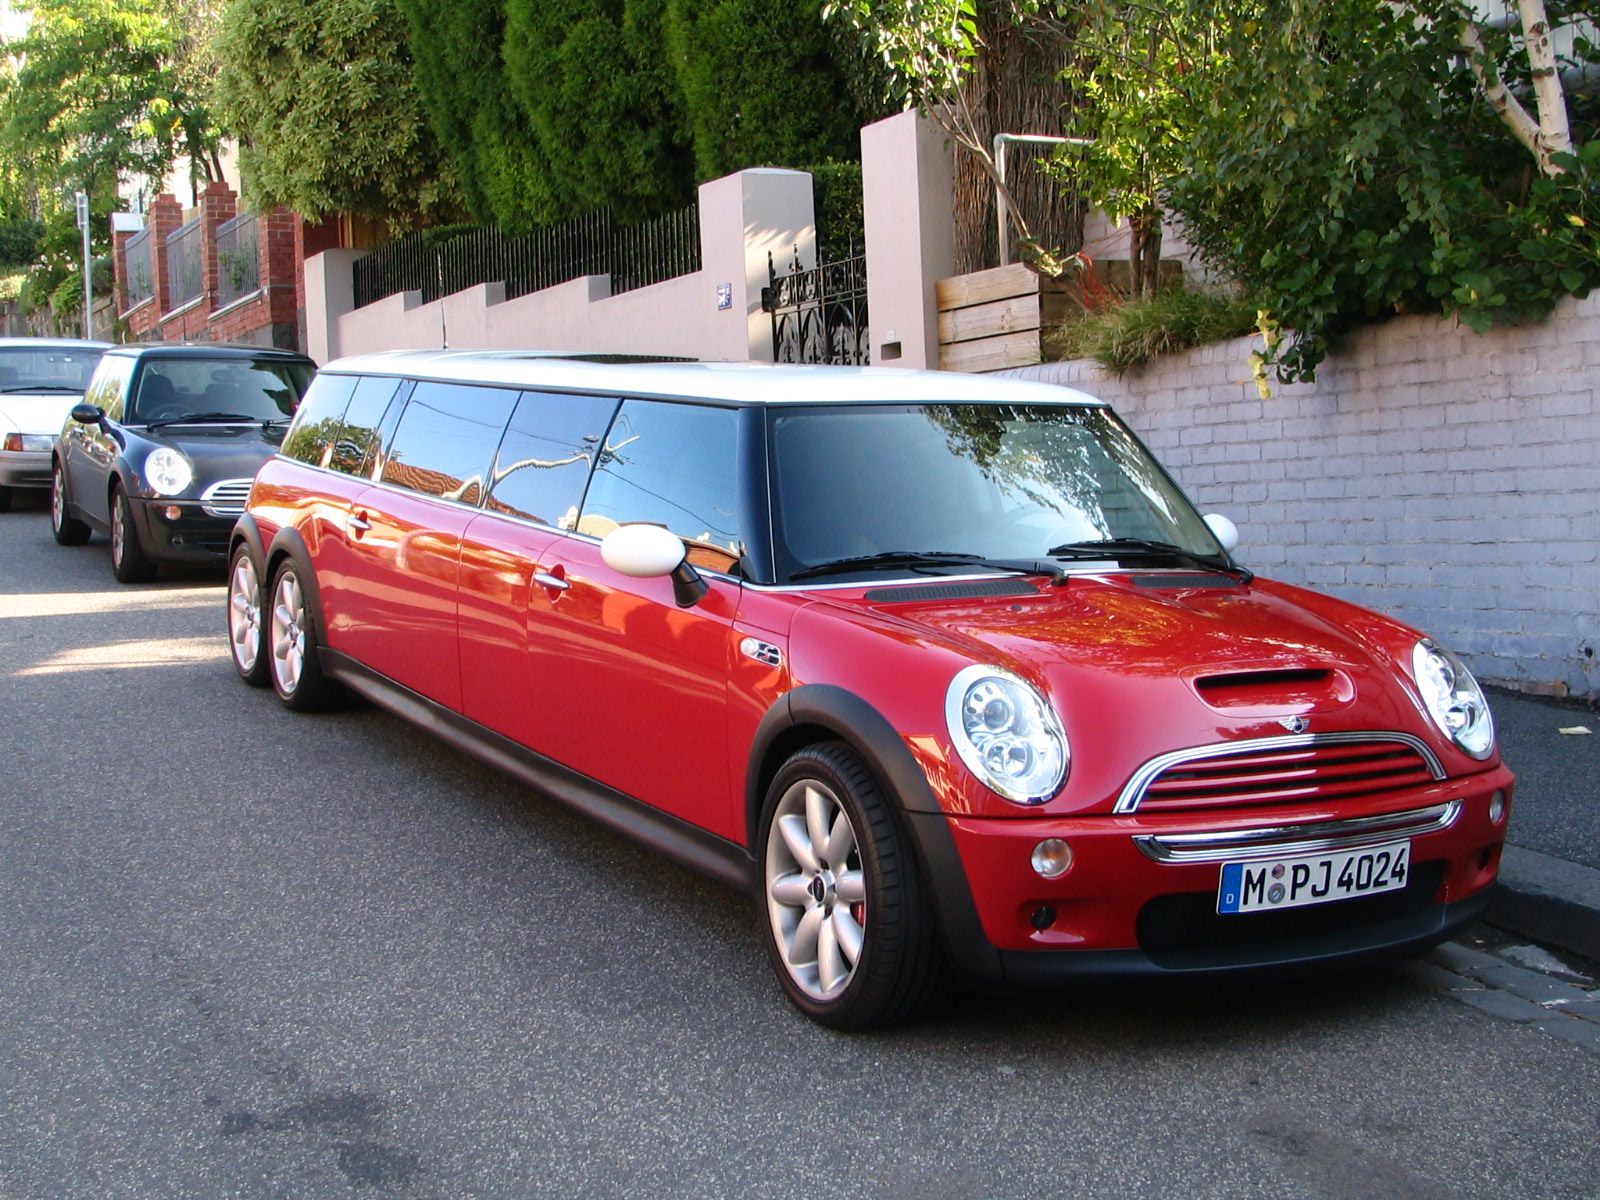 Mini Cooper Limo | Flickr - Photo Sharing!